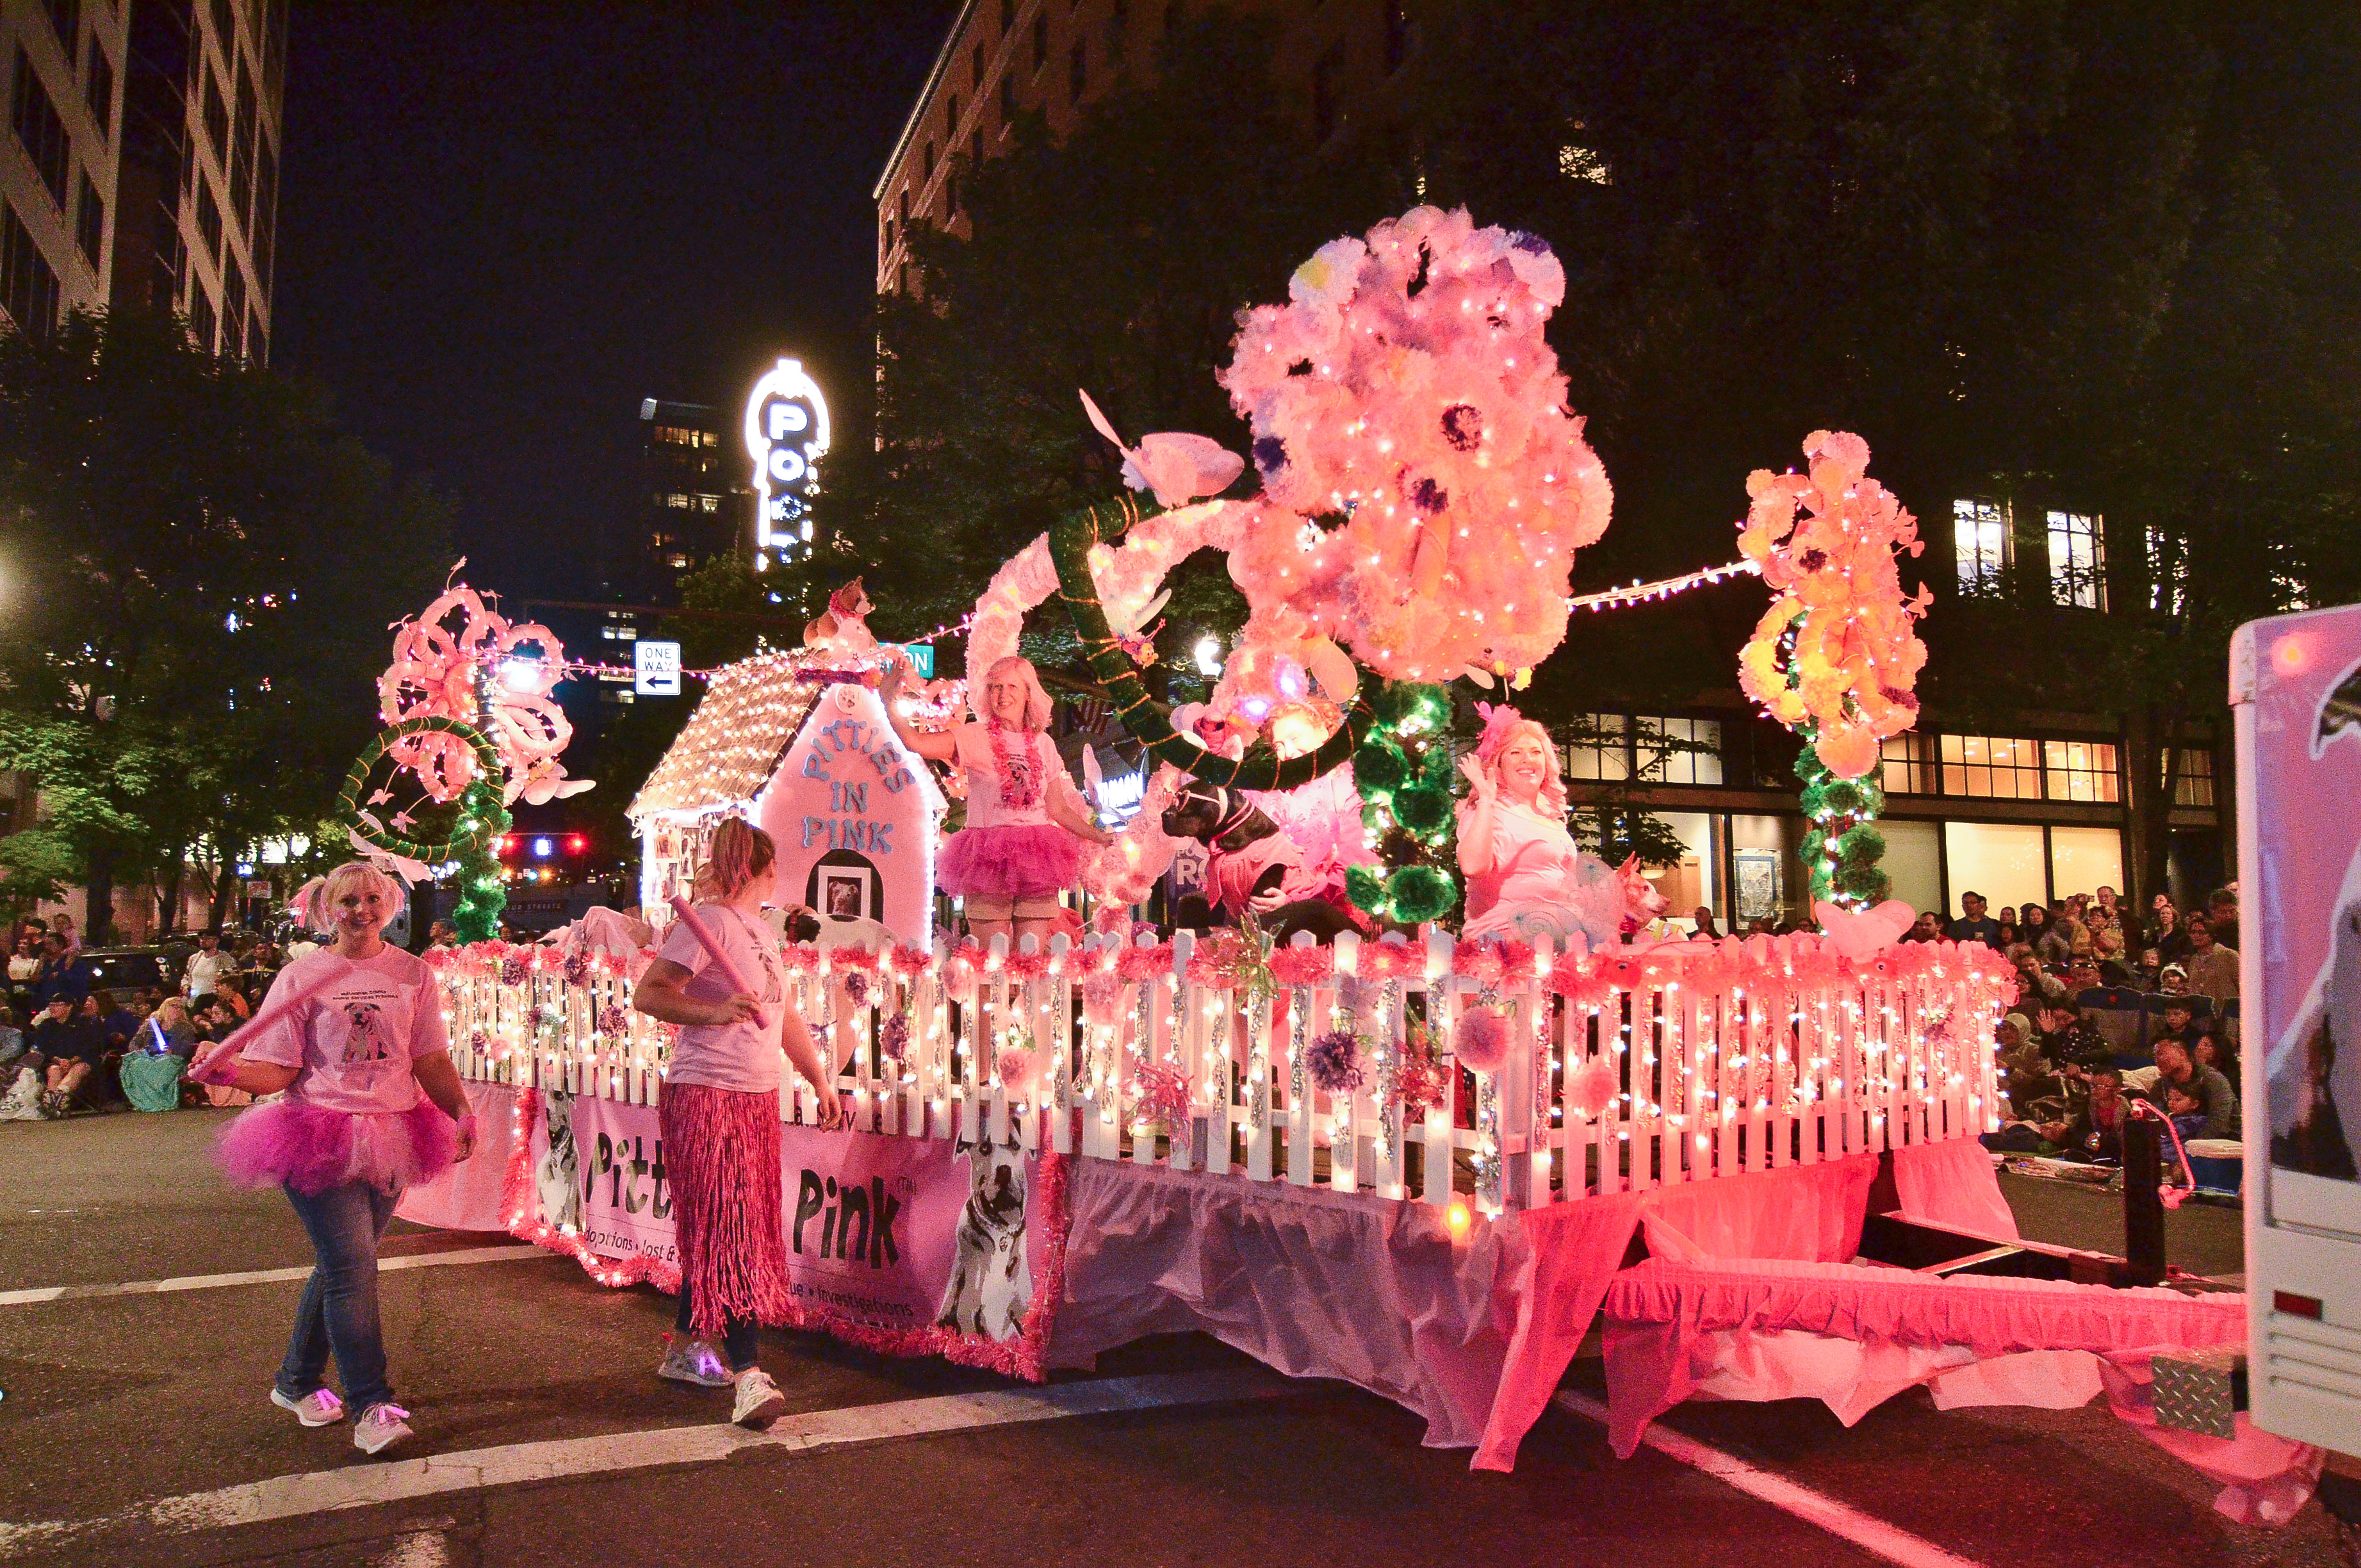 A pink float bedecked with roses rolls down the street accompanied by marchers.